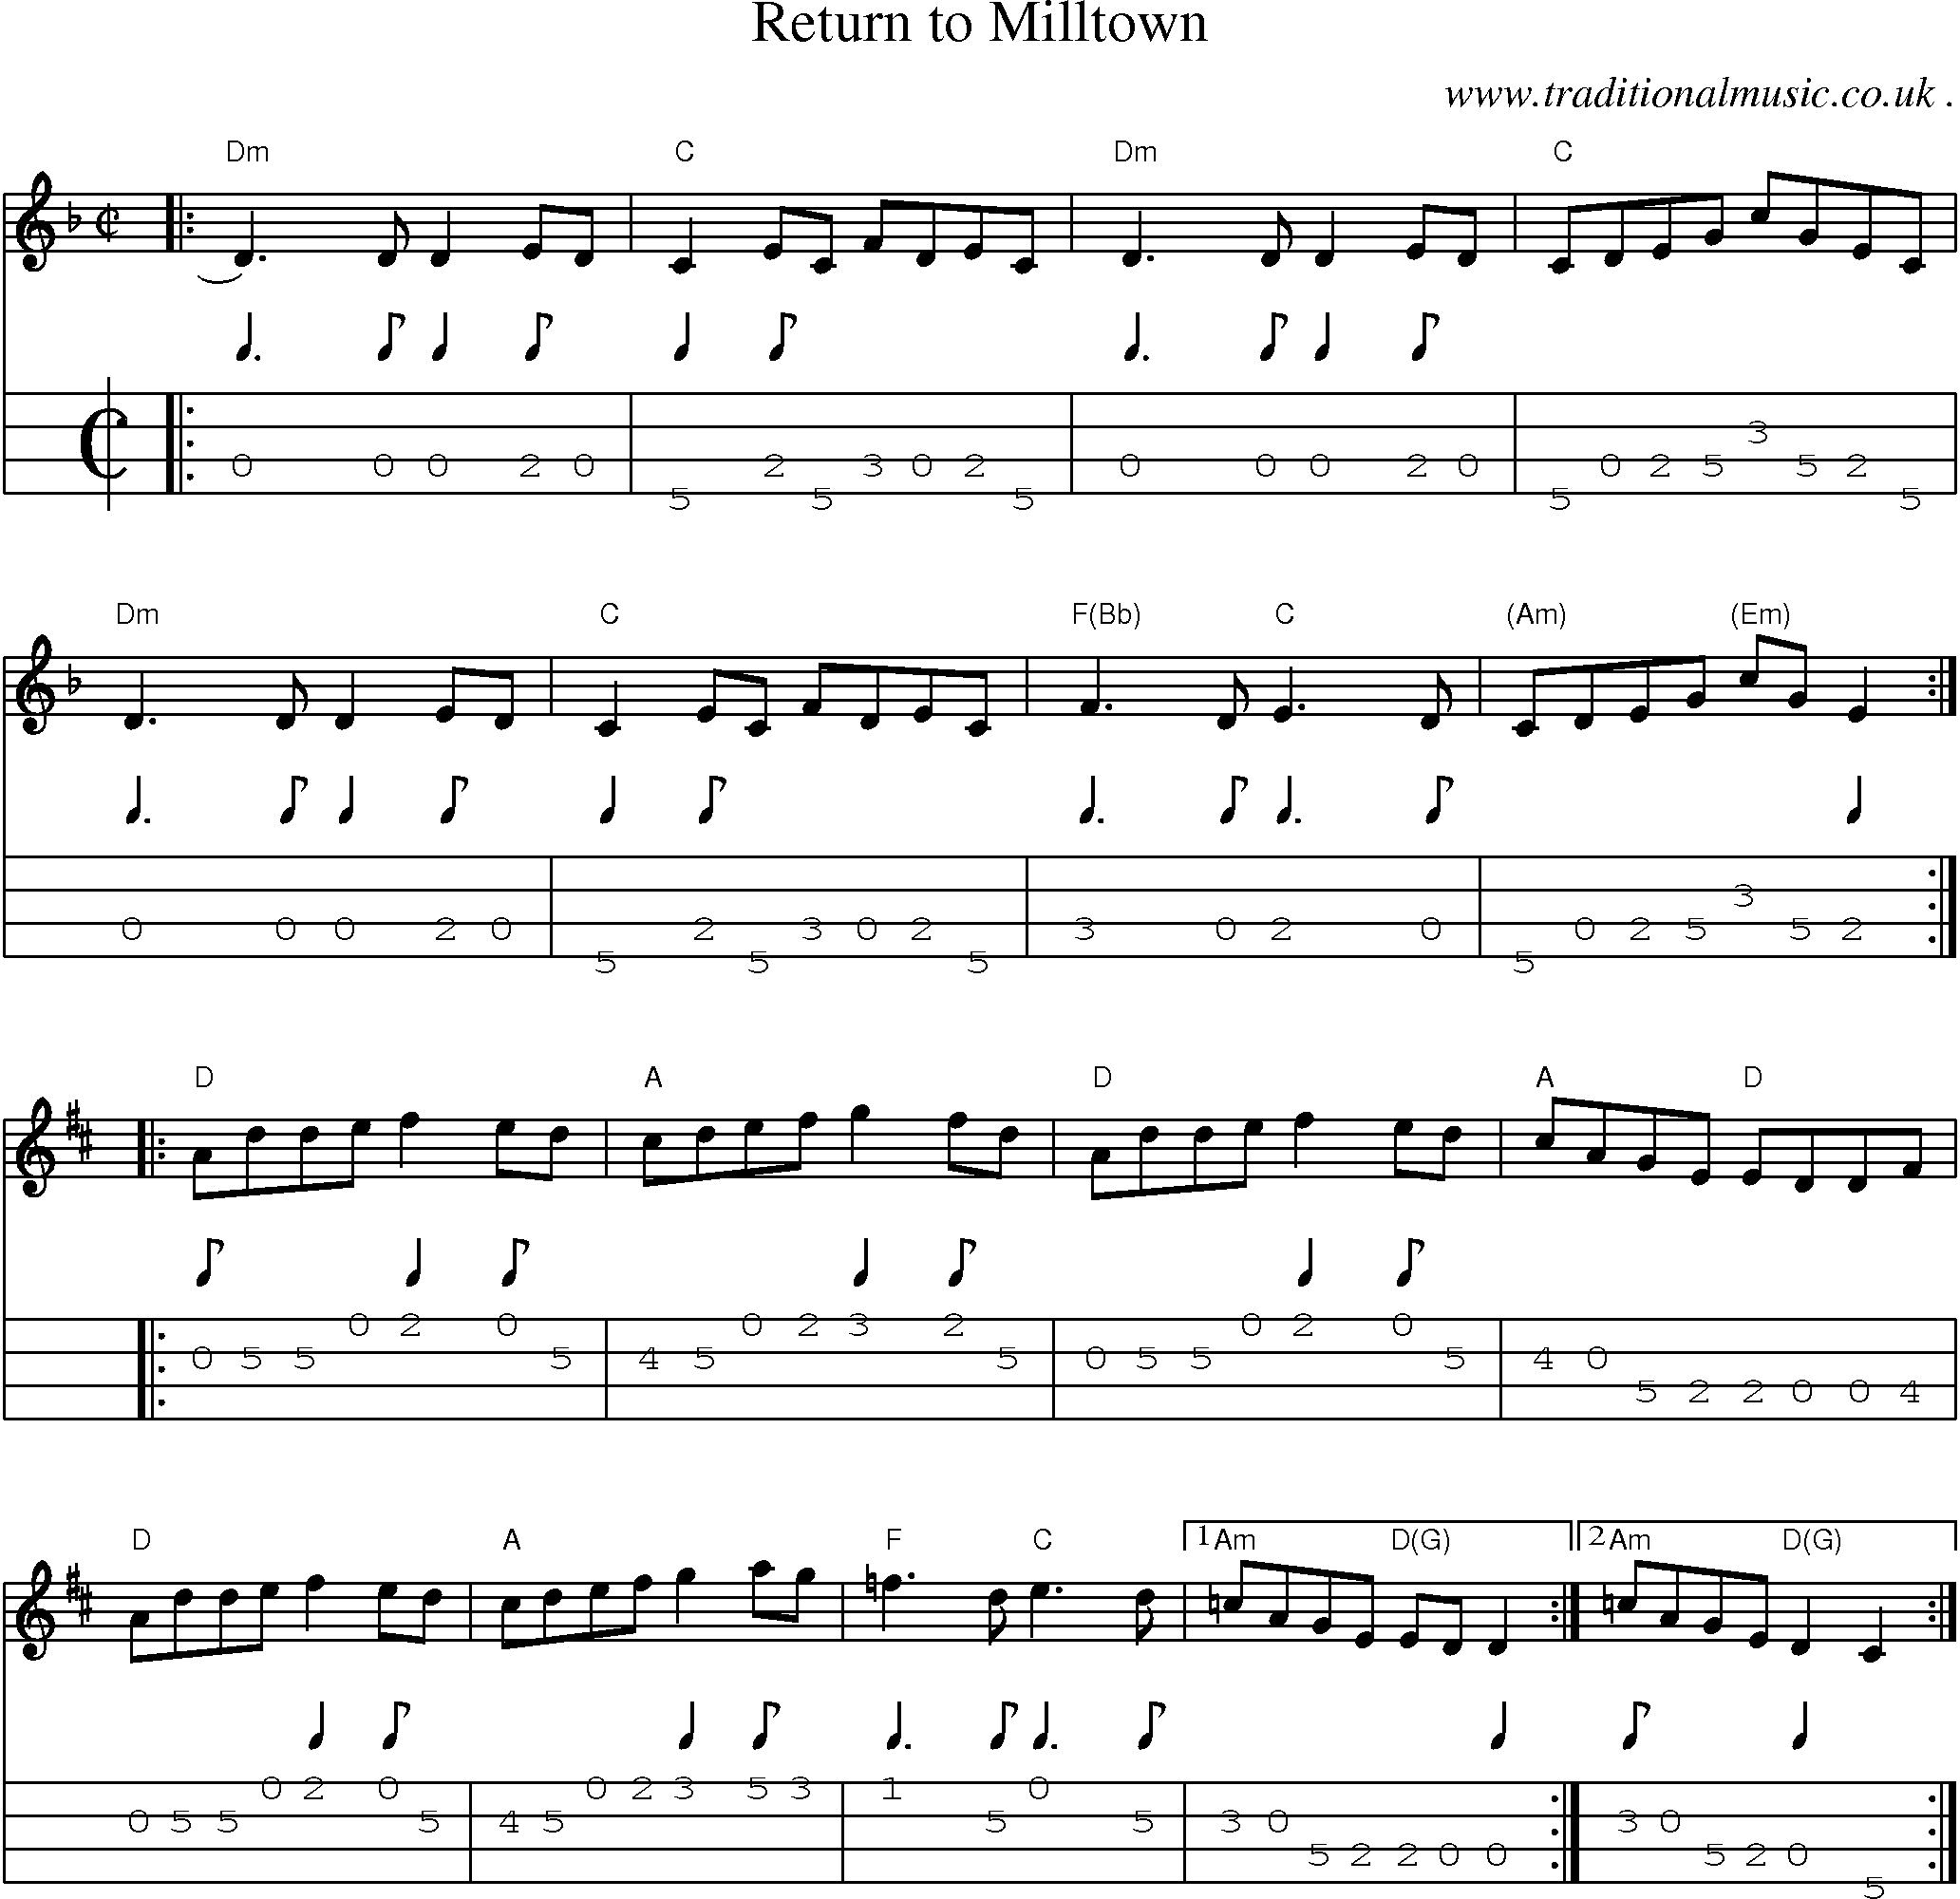 Music Score and Guitar Tabs for Return To Milltown